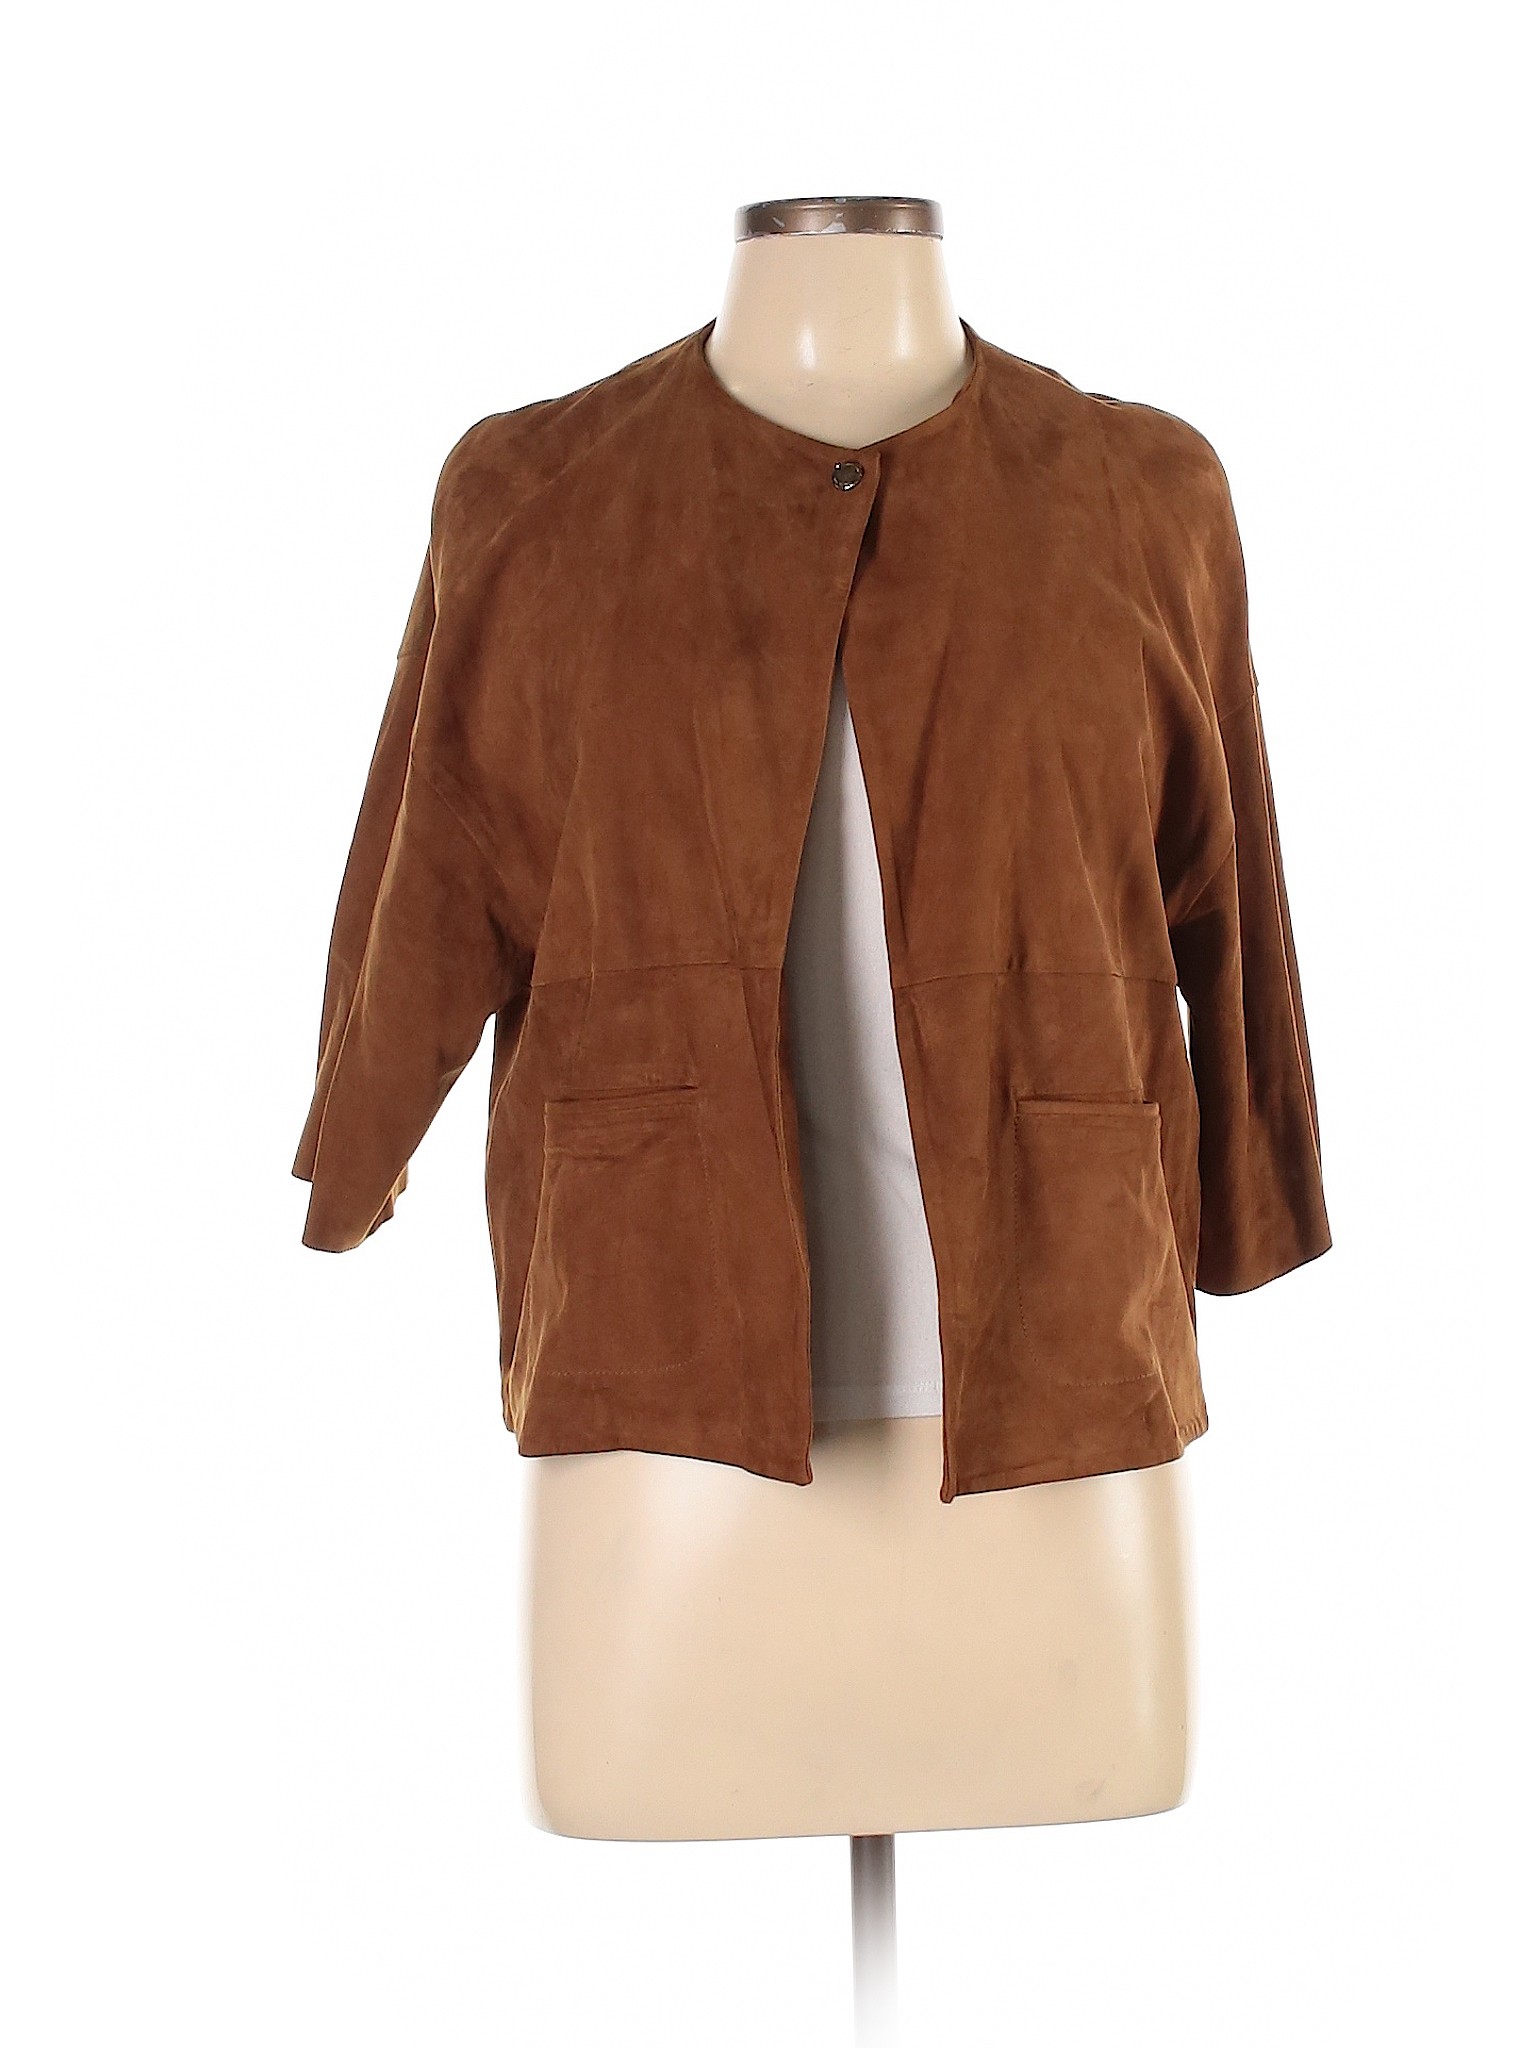 Massimo Dutti 100% Leather Solid Brown Leather Jacket Size L - 88% off ...